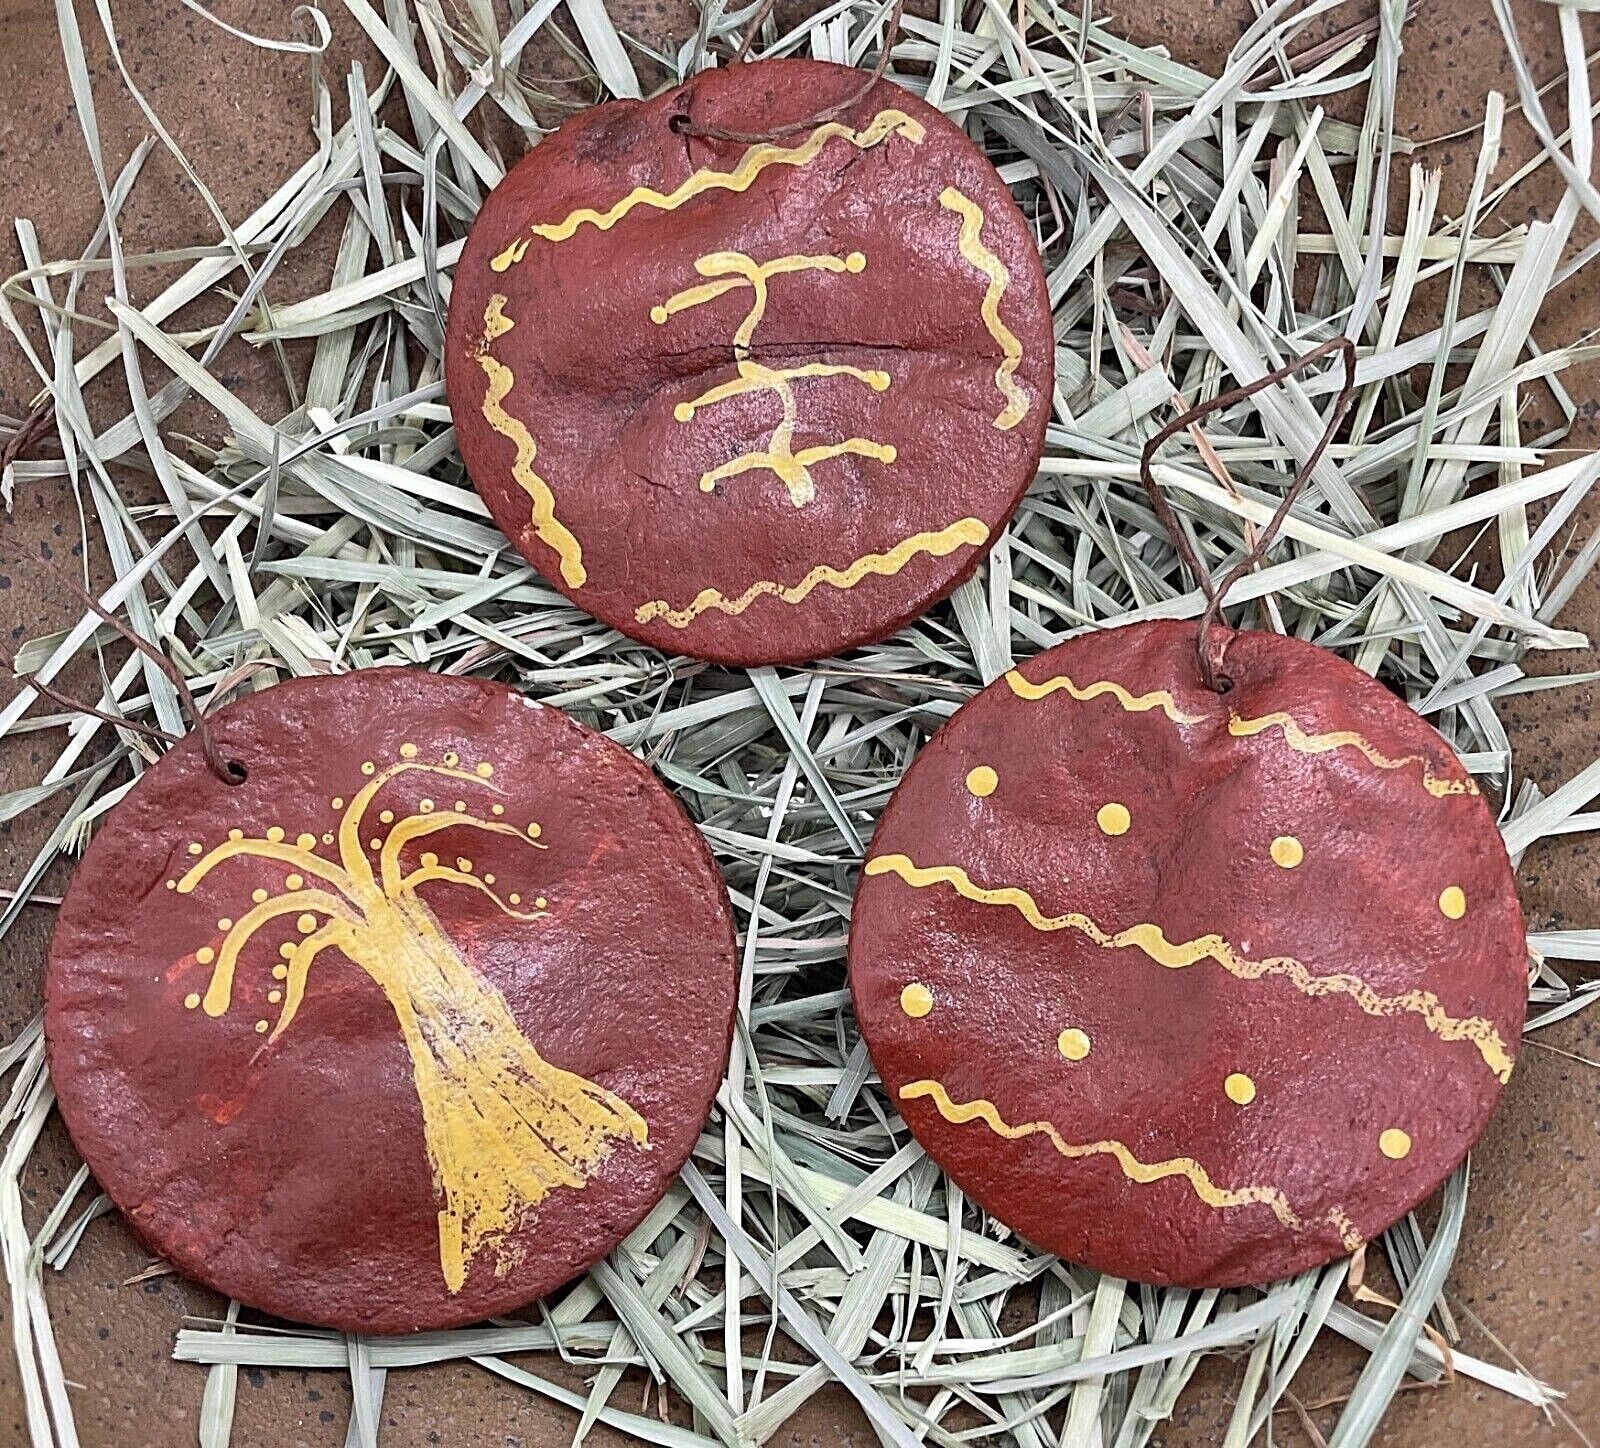 Primitive Christmas Handmade Dough Redware Style Painted Ornaments 2.5&quot; - The Primitive Pineapple Collection